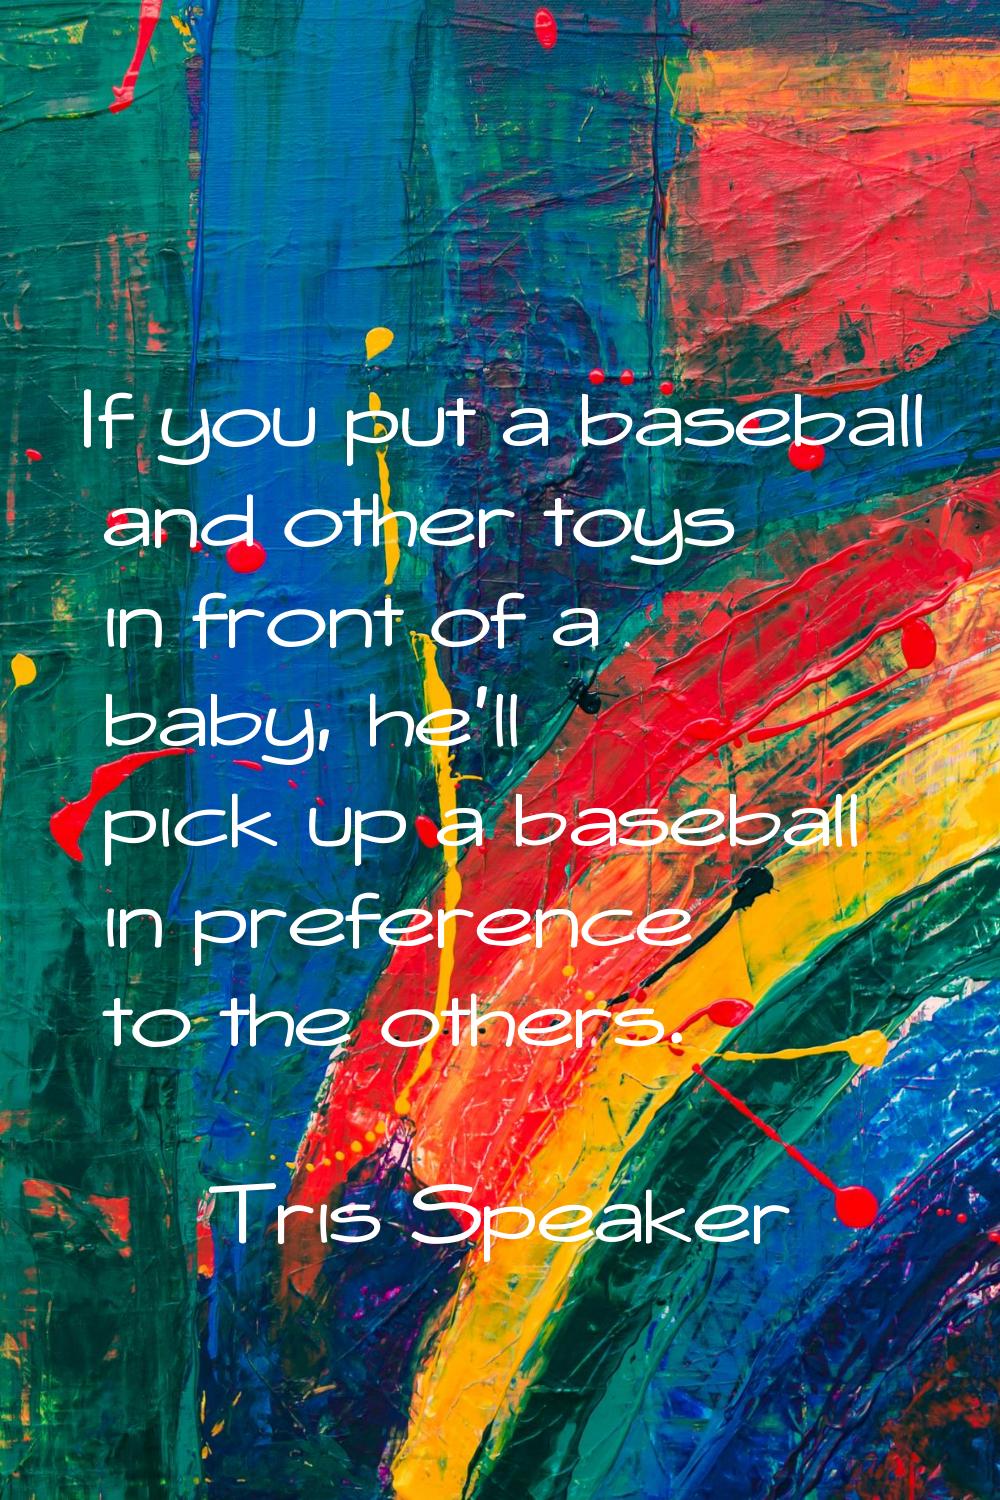 If you put a baseball and other toys in front of a baby, he'll pick up a baseball in preference to 